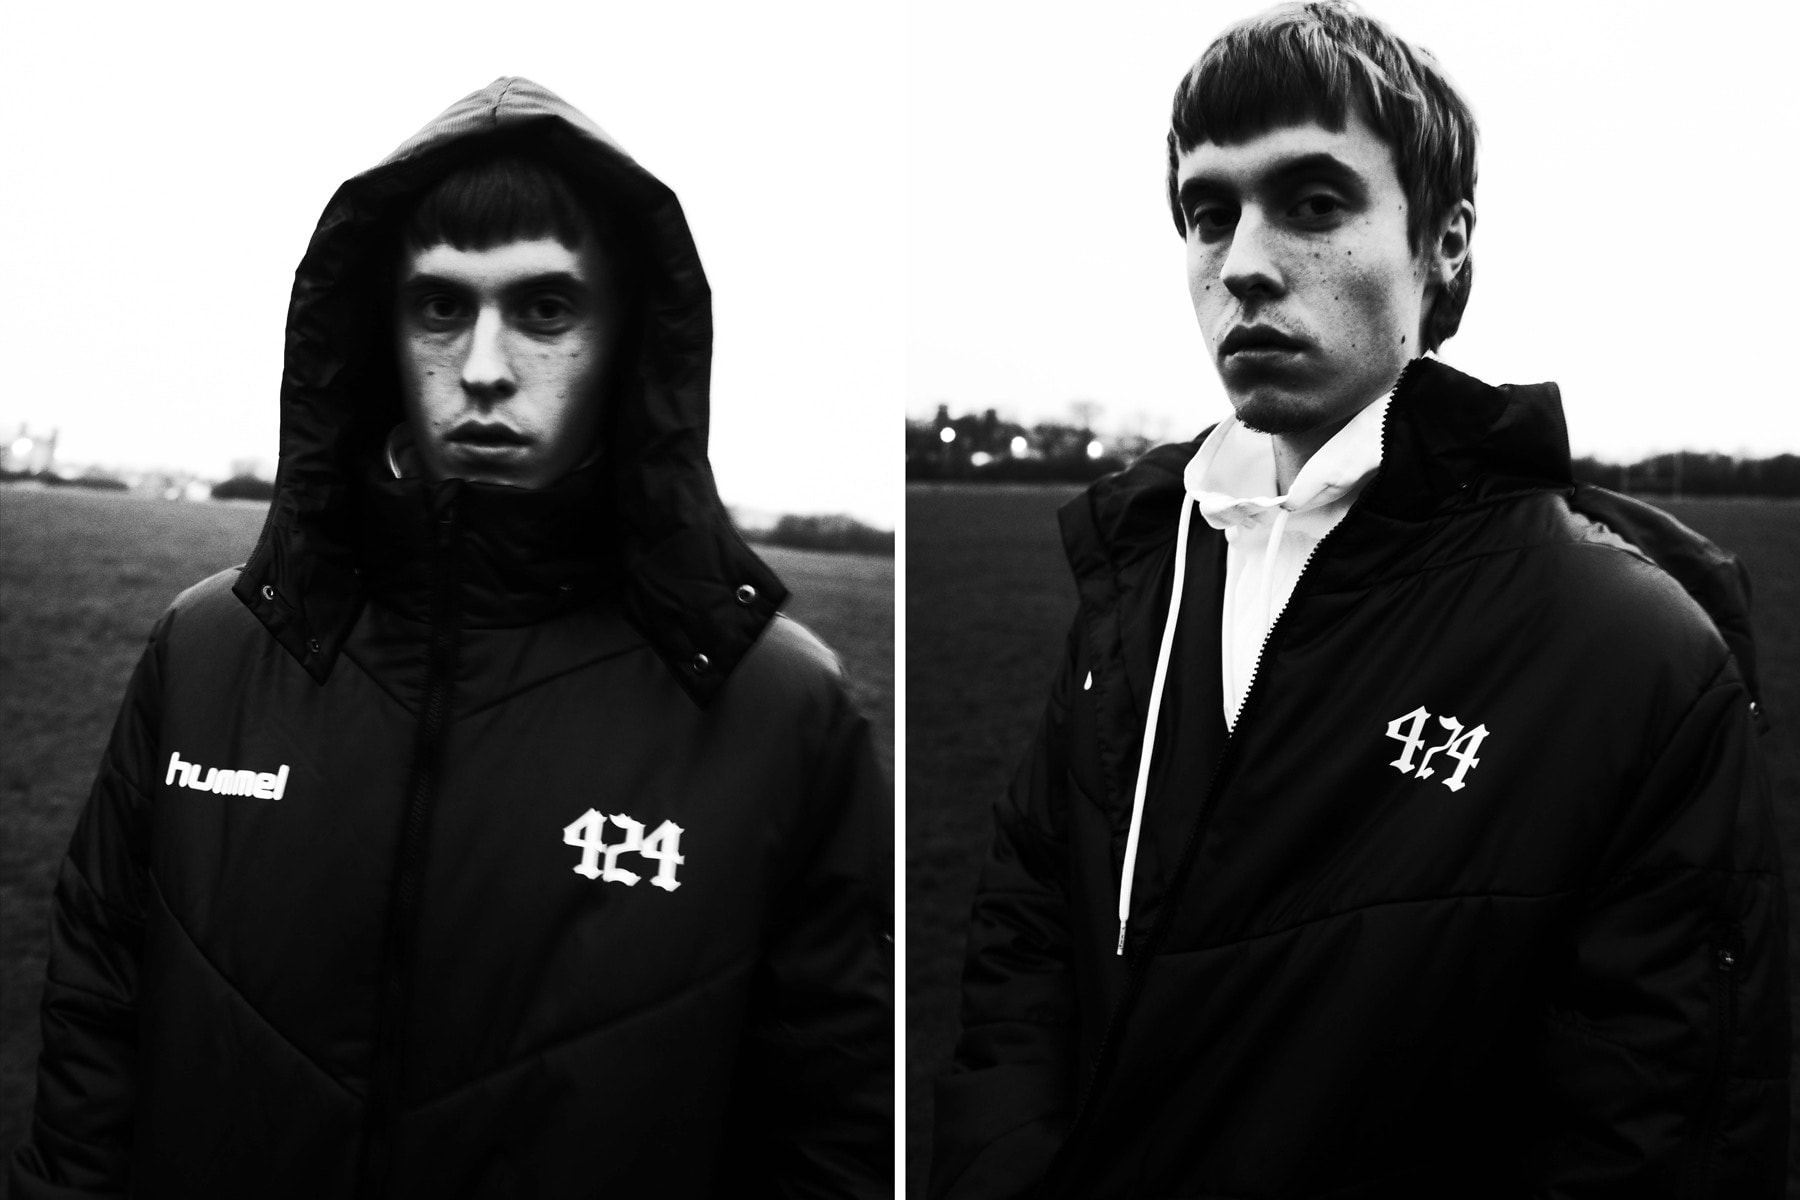 Hummel 424 Football Collection Capsule